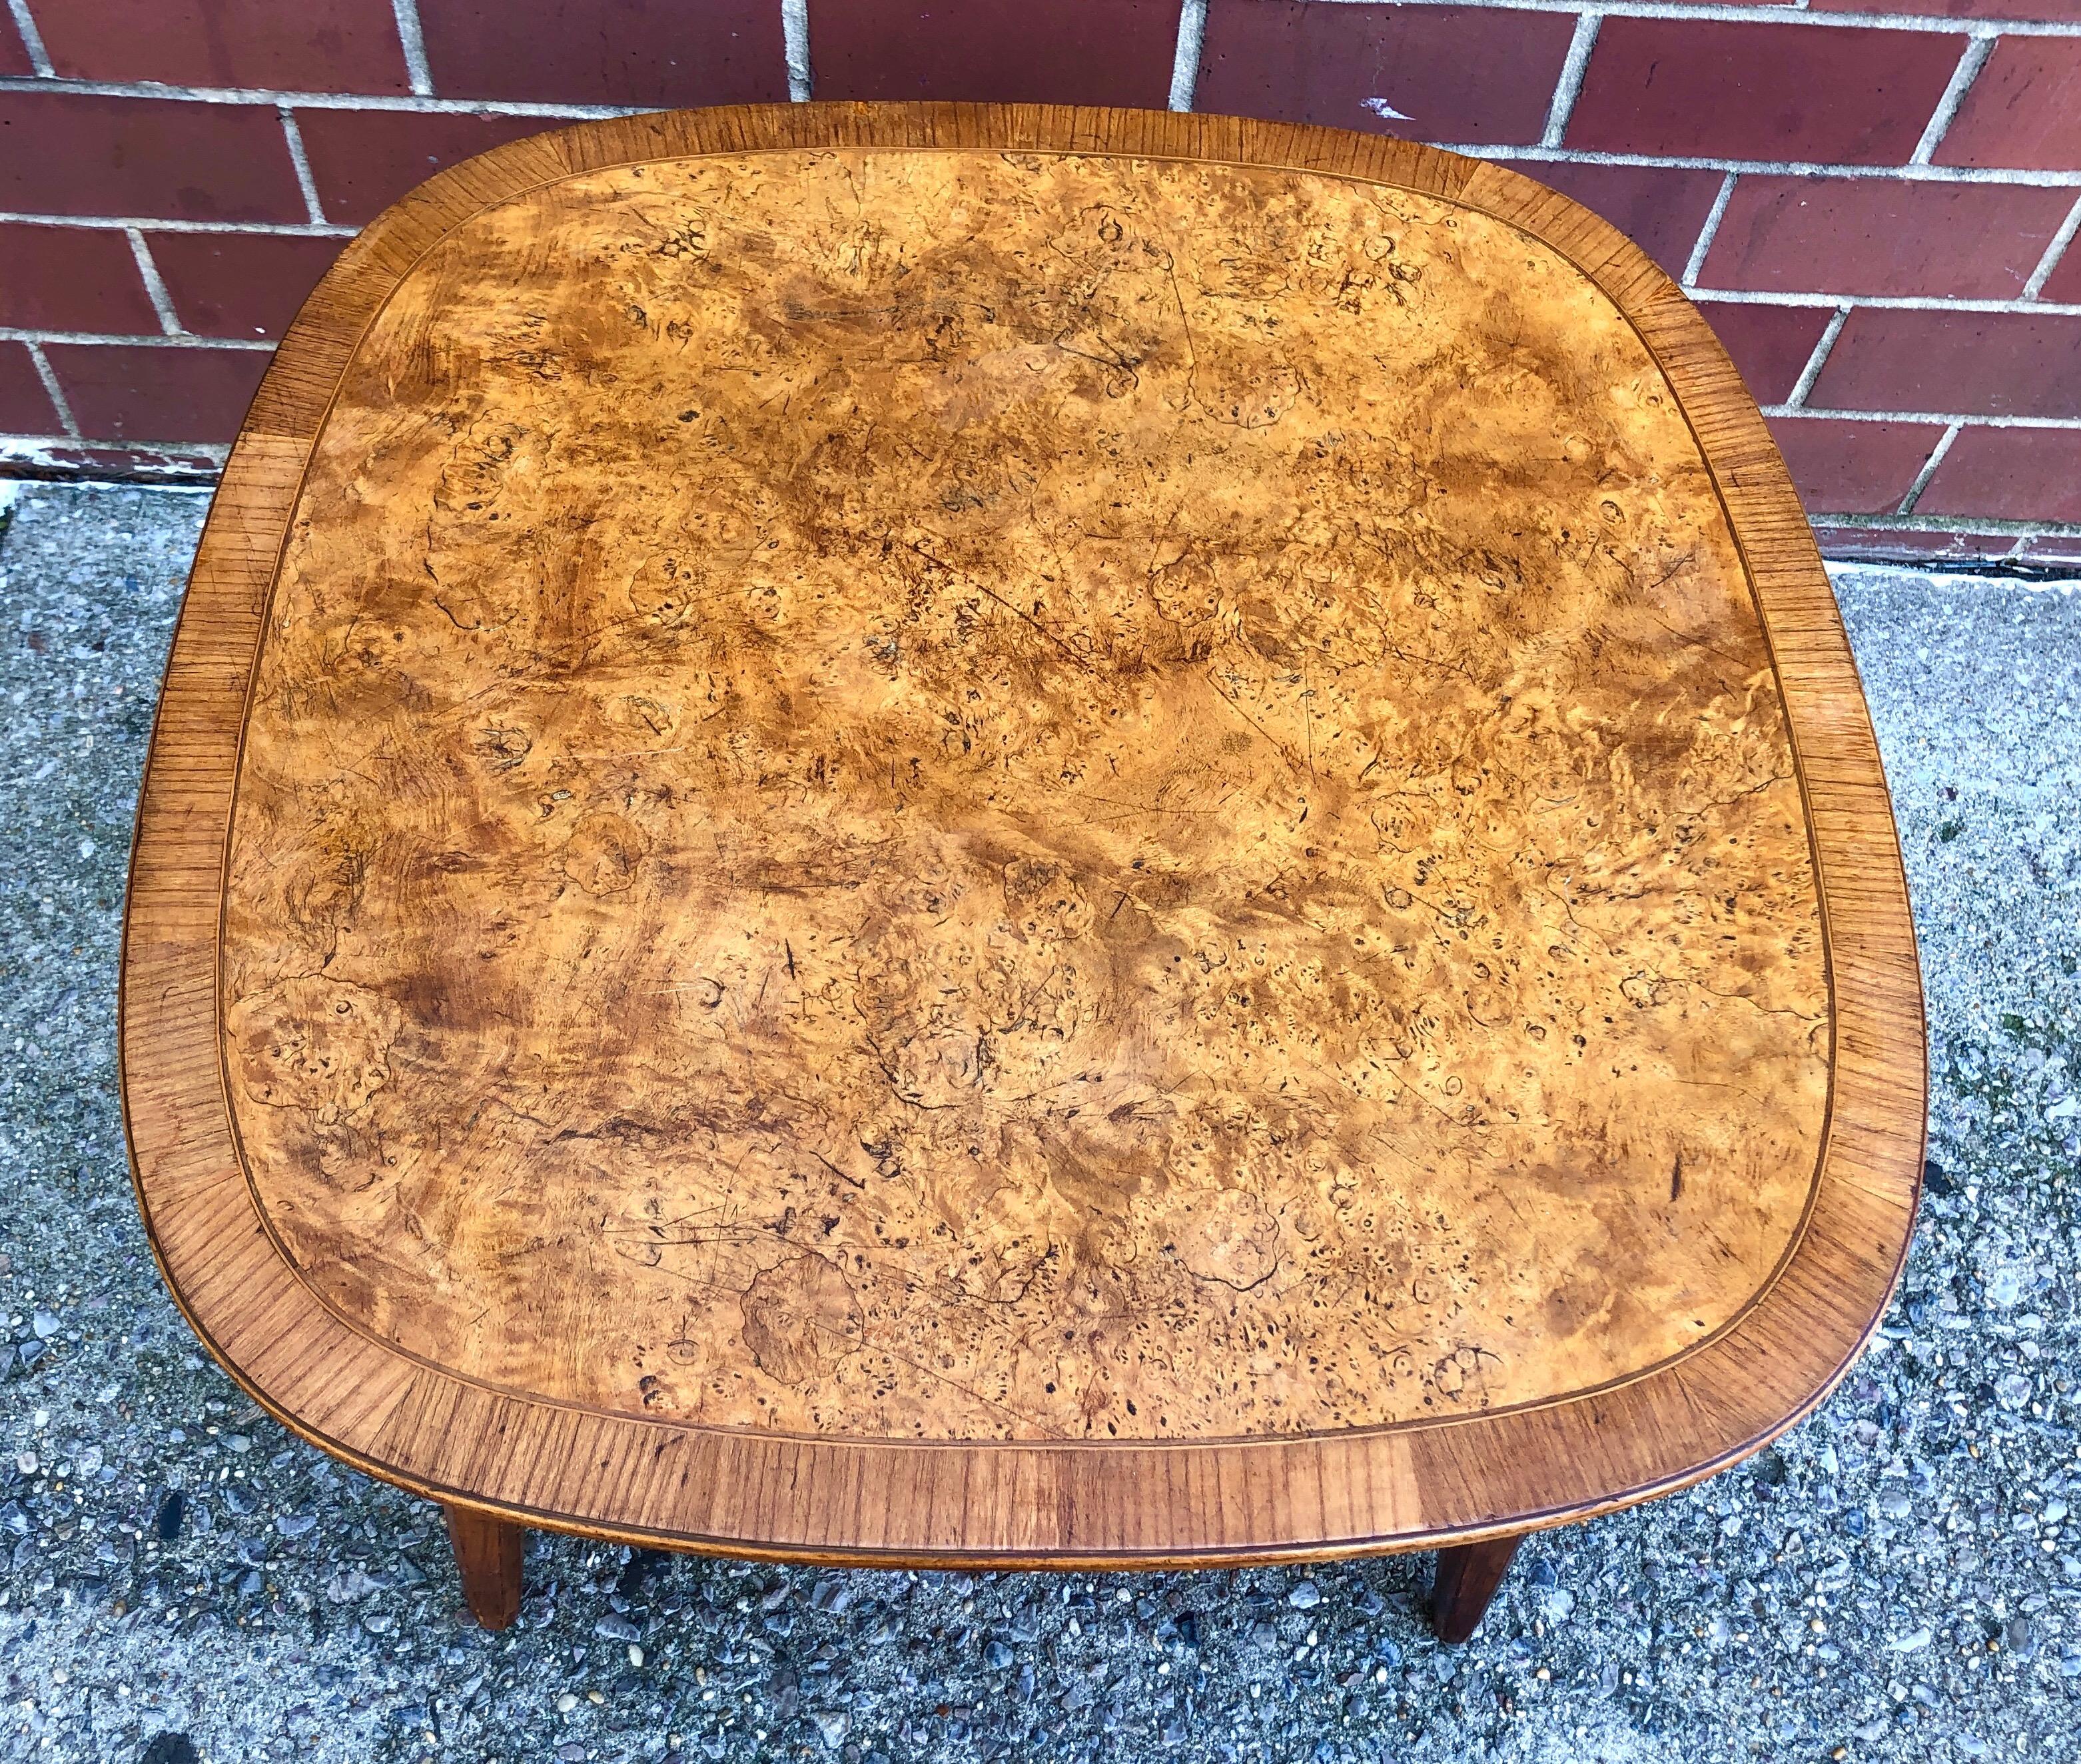 American walnut occasional or lamp table with burl maple inlaid top and hickory edge, circa 1957. Nice architectural details like exposed supports and octagonal carved legs. Unmarked and possibly custom made, although very similar to George